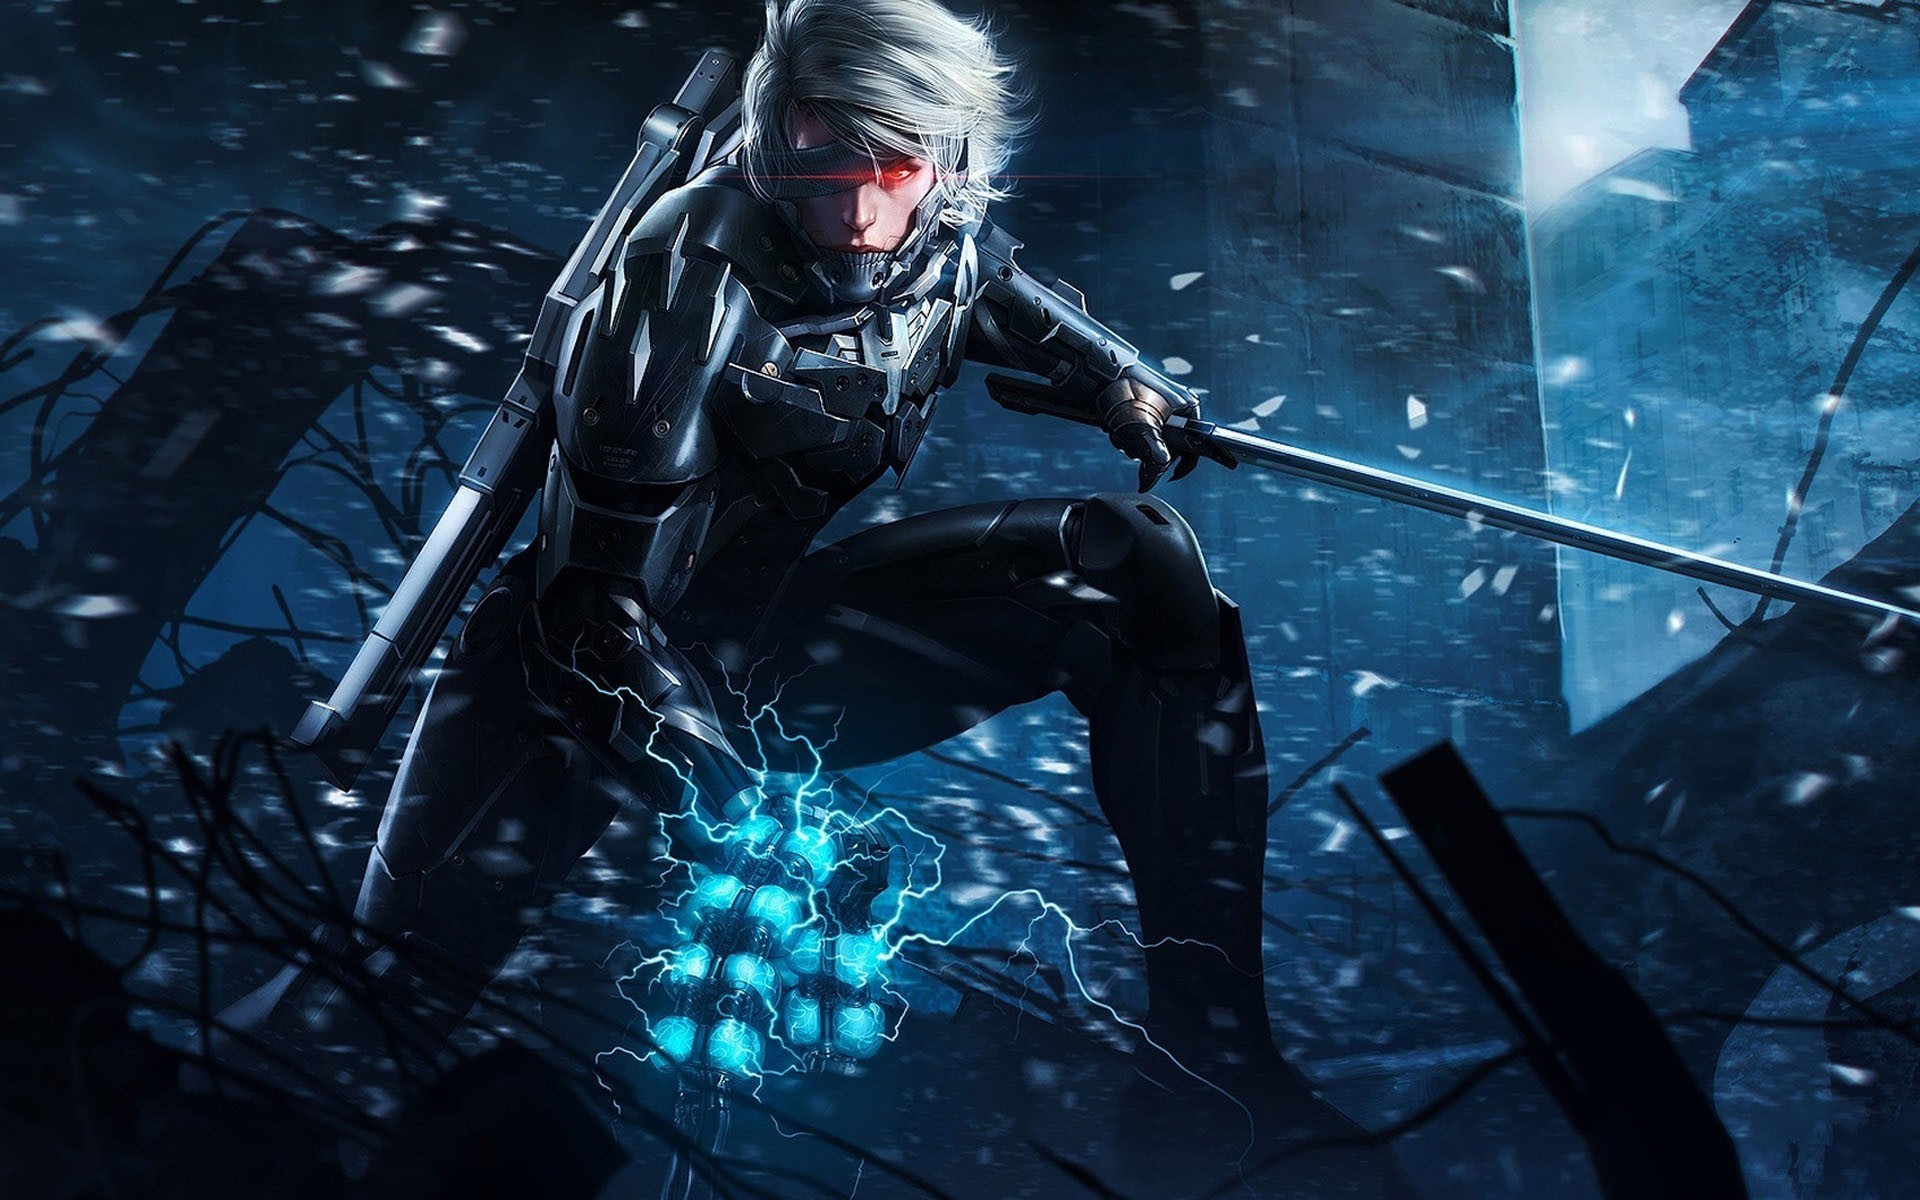 Metal Gear Rising Revengeance Wallpapers For Iphone 5 HQ Backgrounds